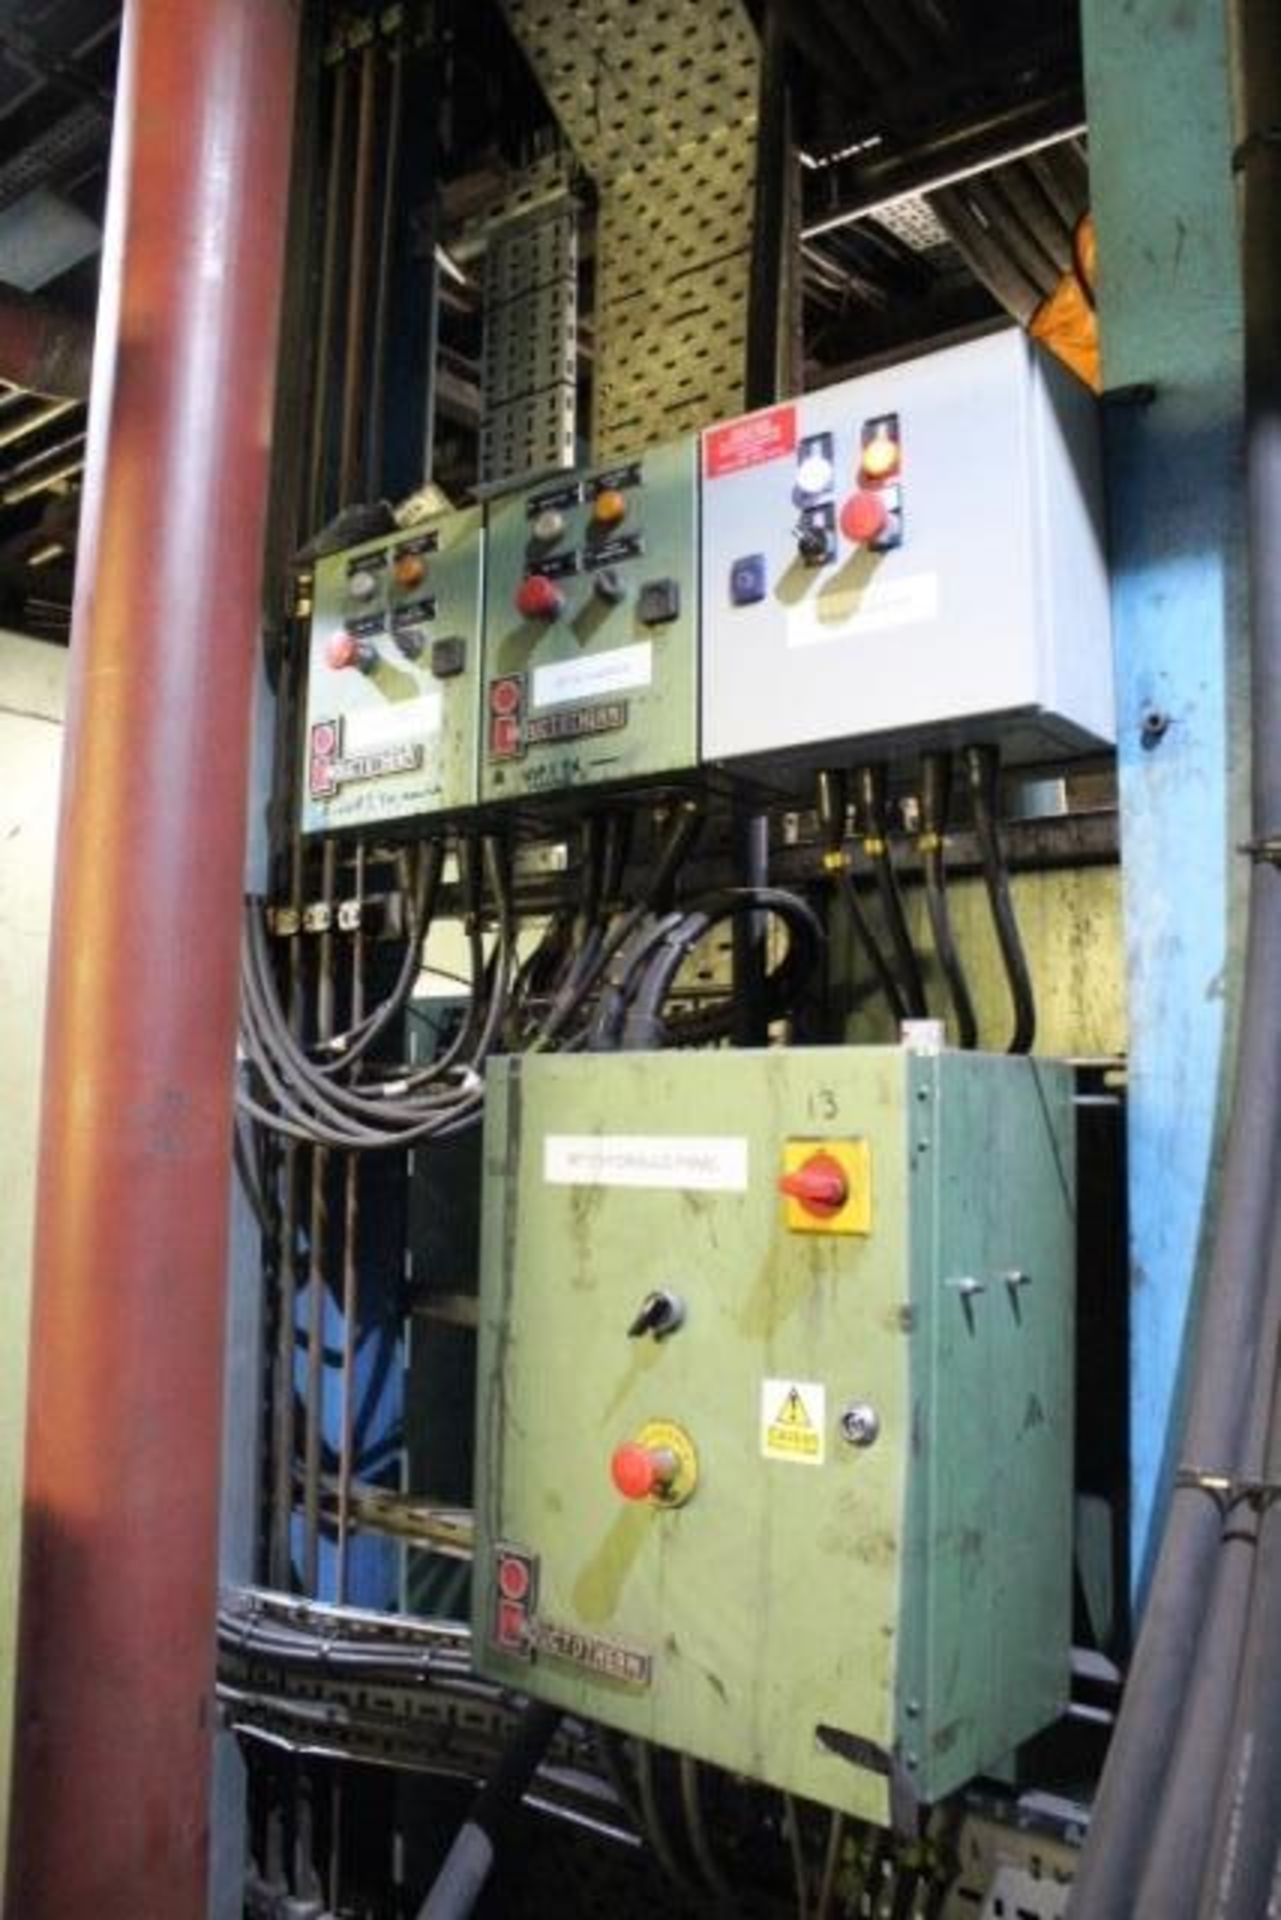 Inductotherm furnace cooling forced air chiller circuit pump system operating both furnace lots - Image 5 of 5